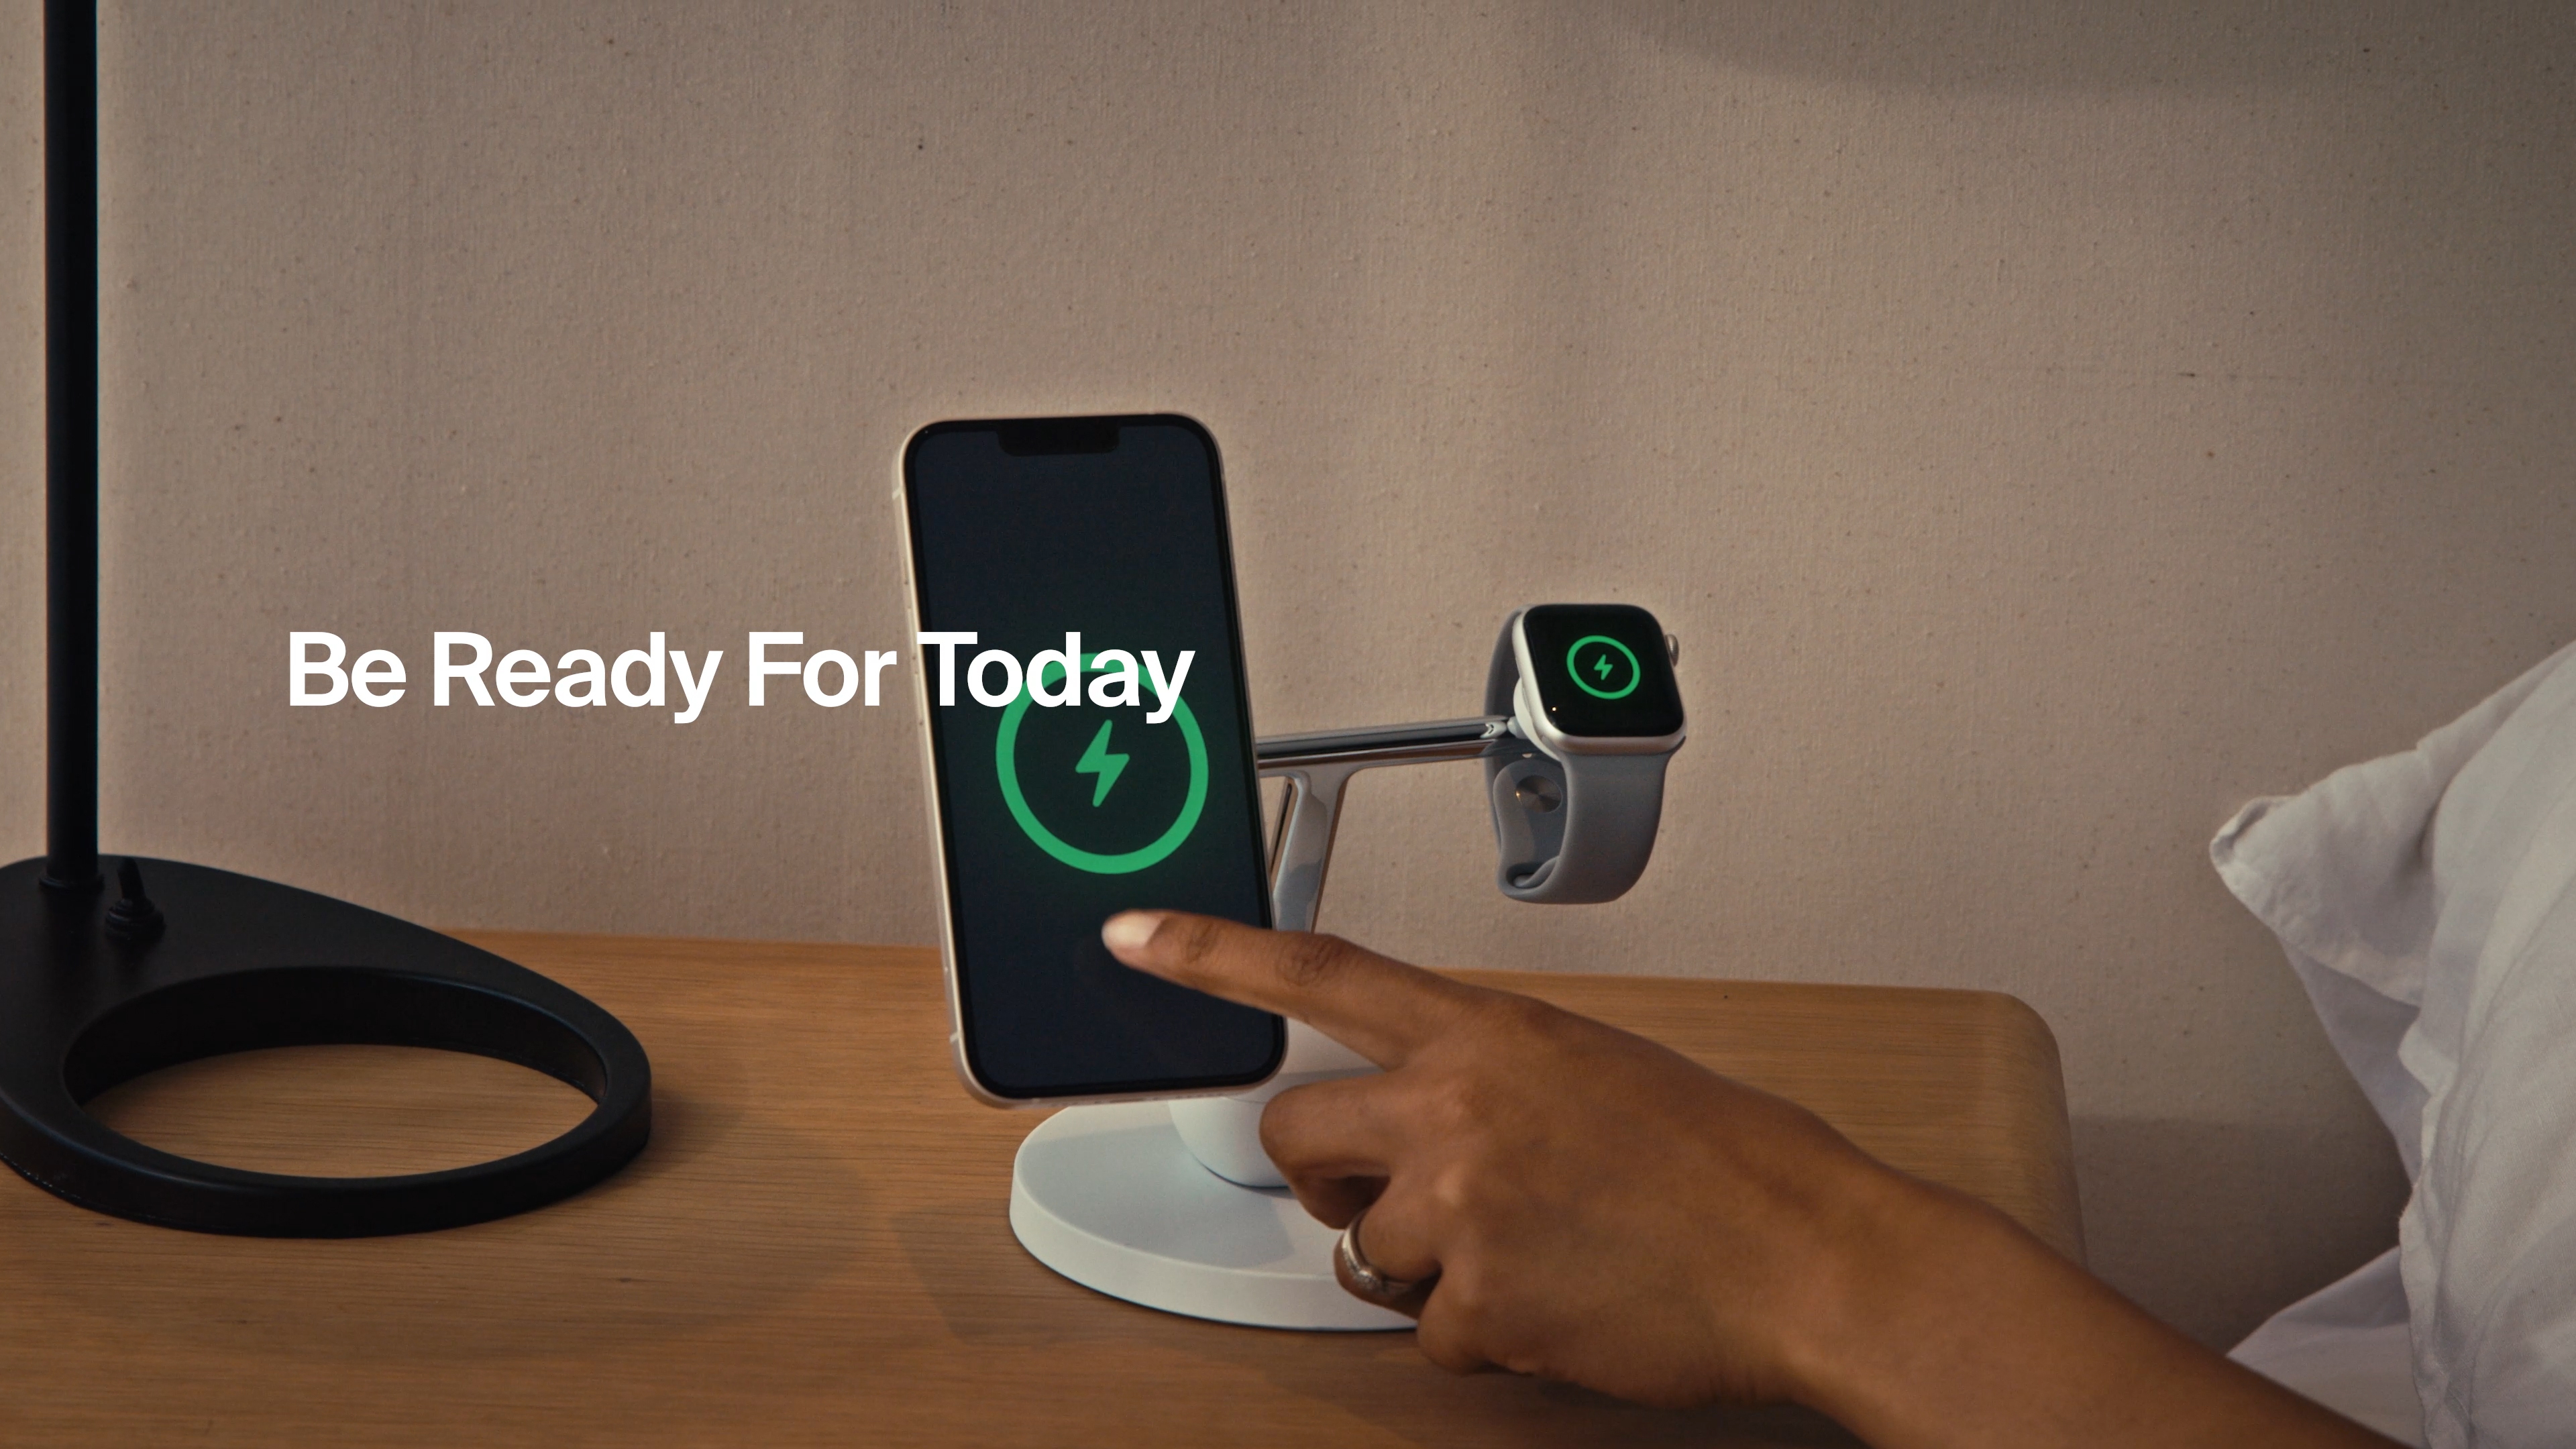 Belkin rebrands to Be Ready for Today